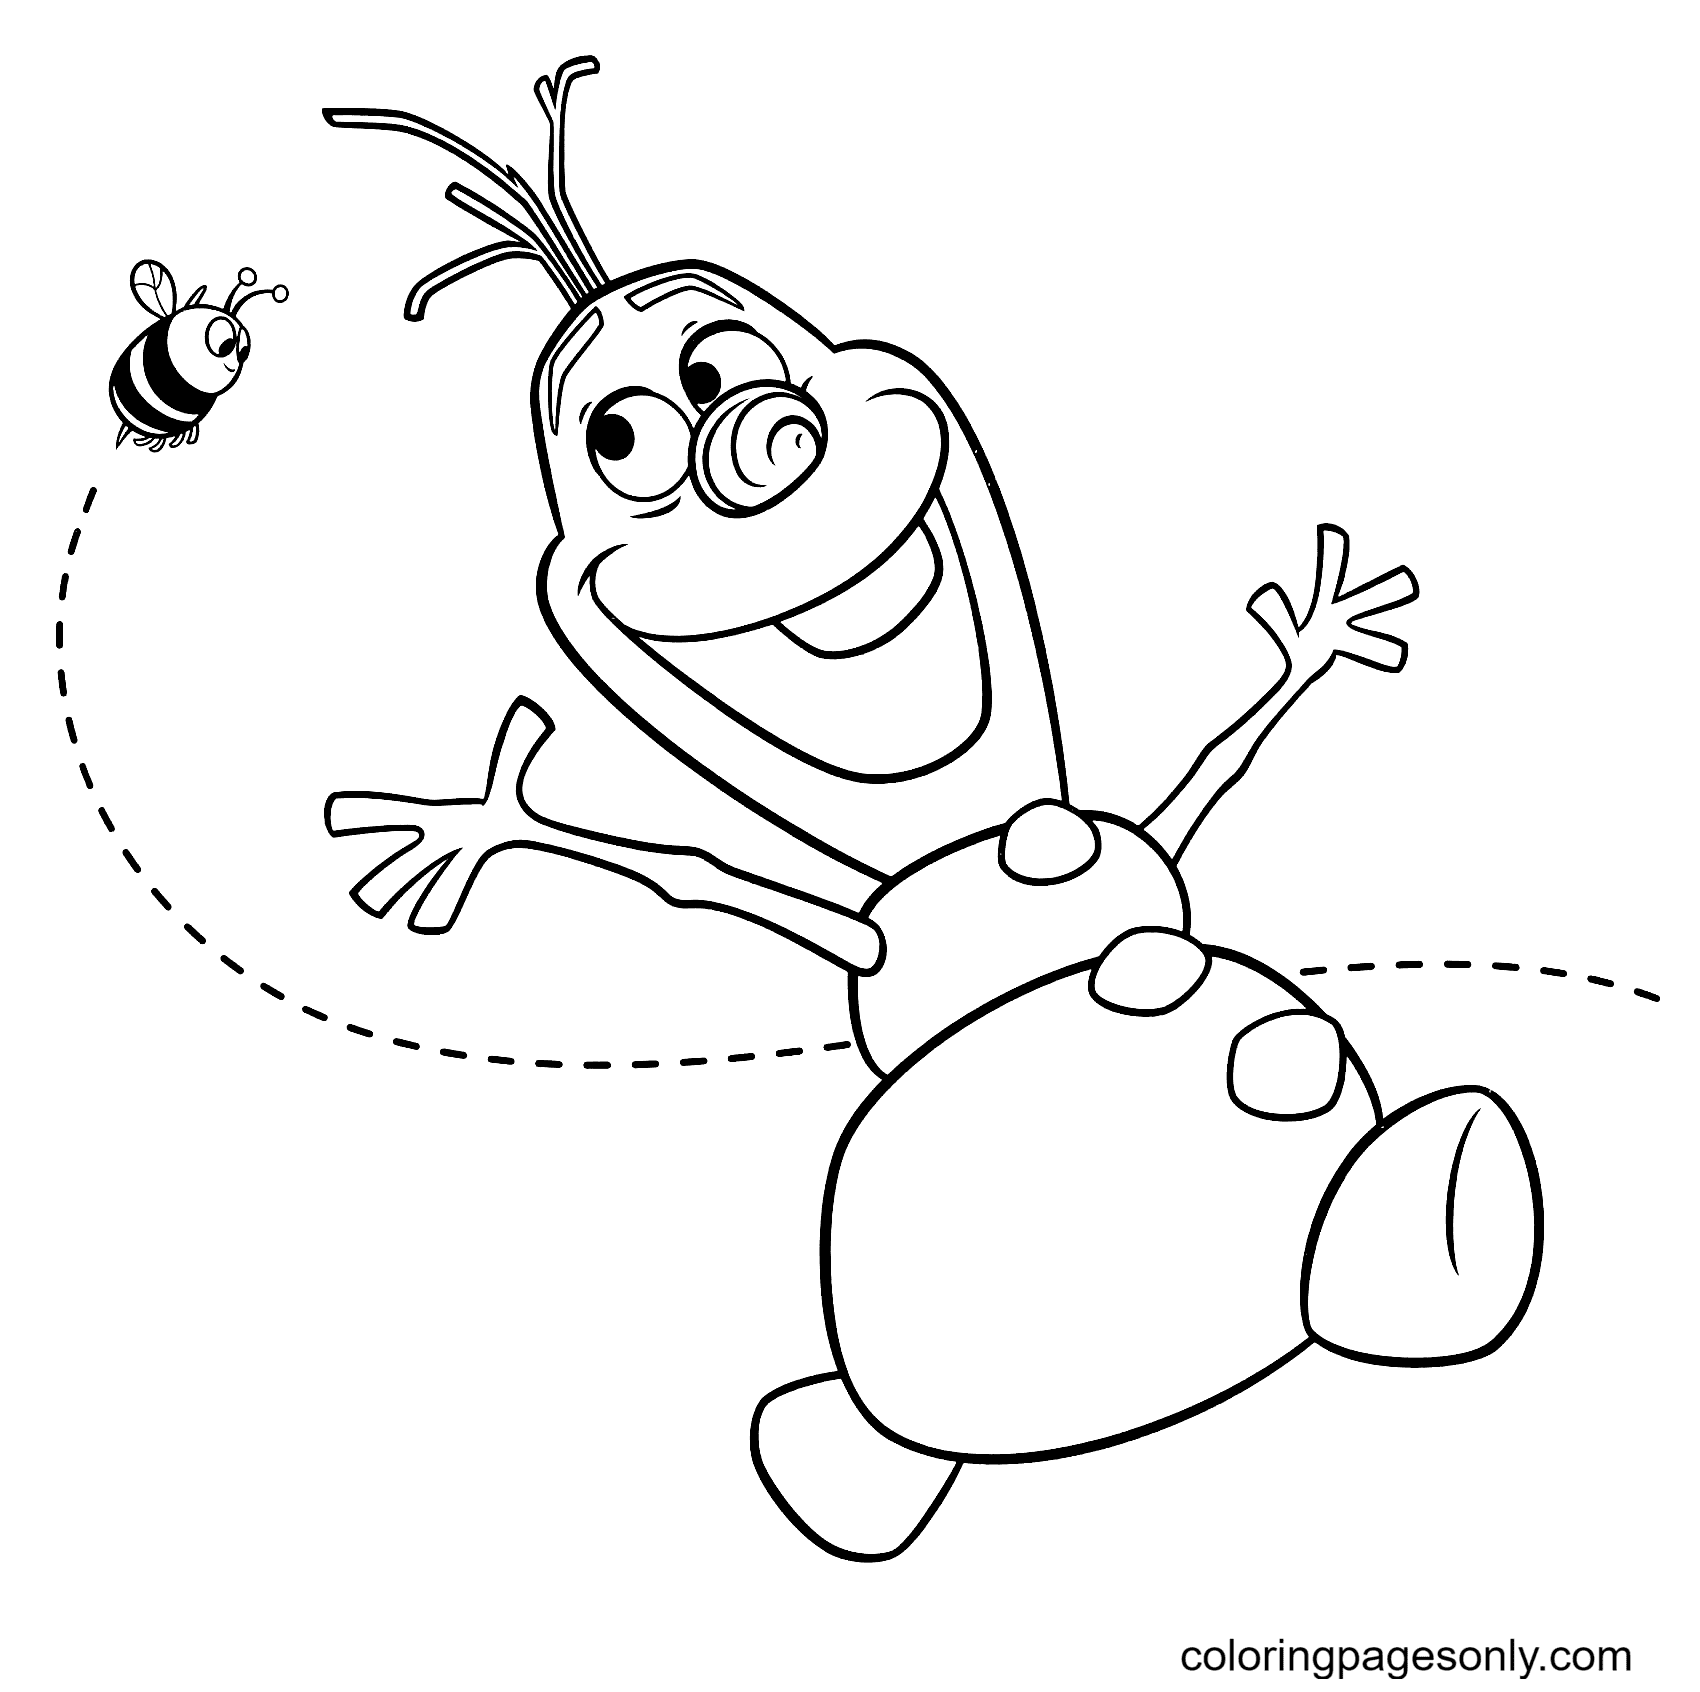 Snowman Olaf Playing with a Bee Coloring Page